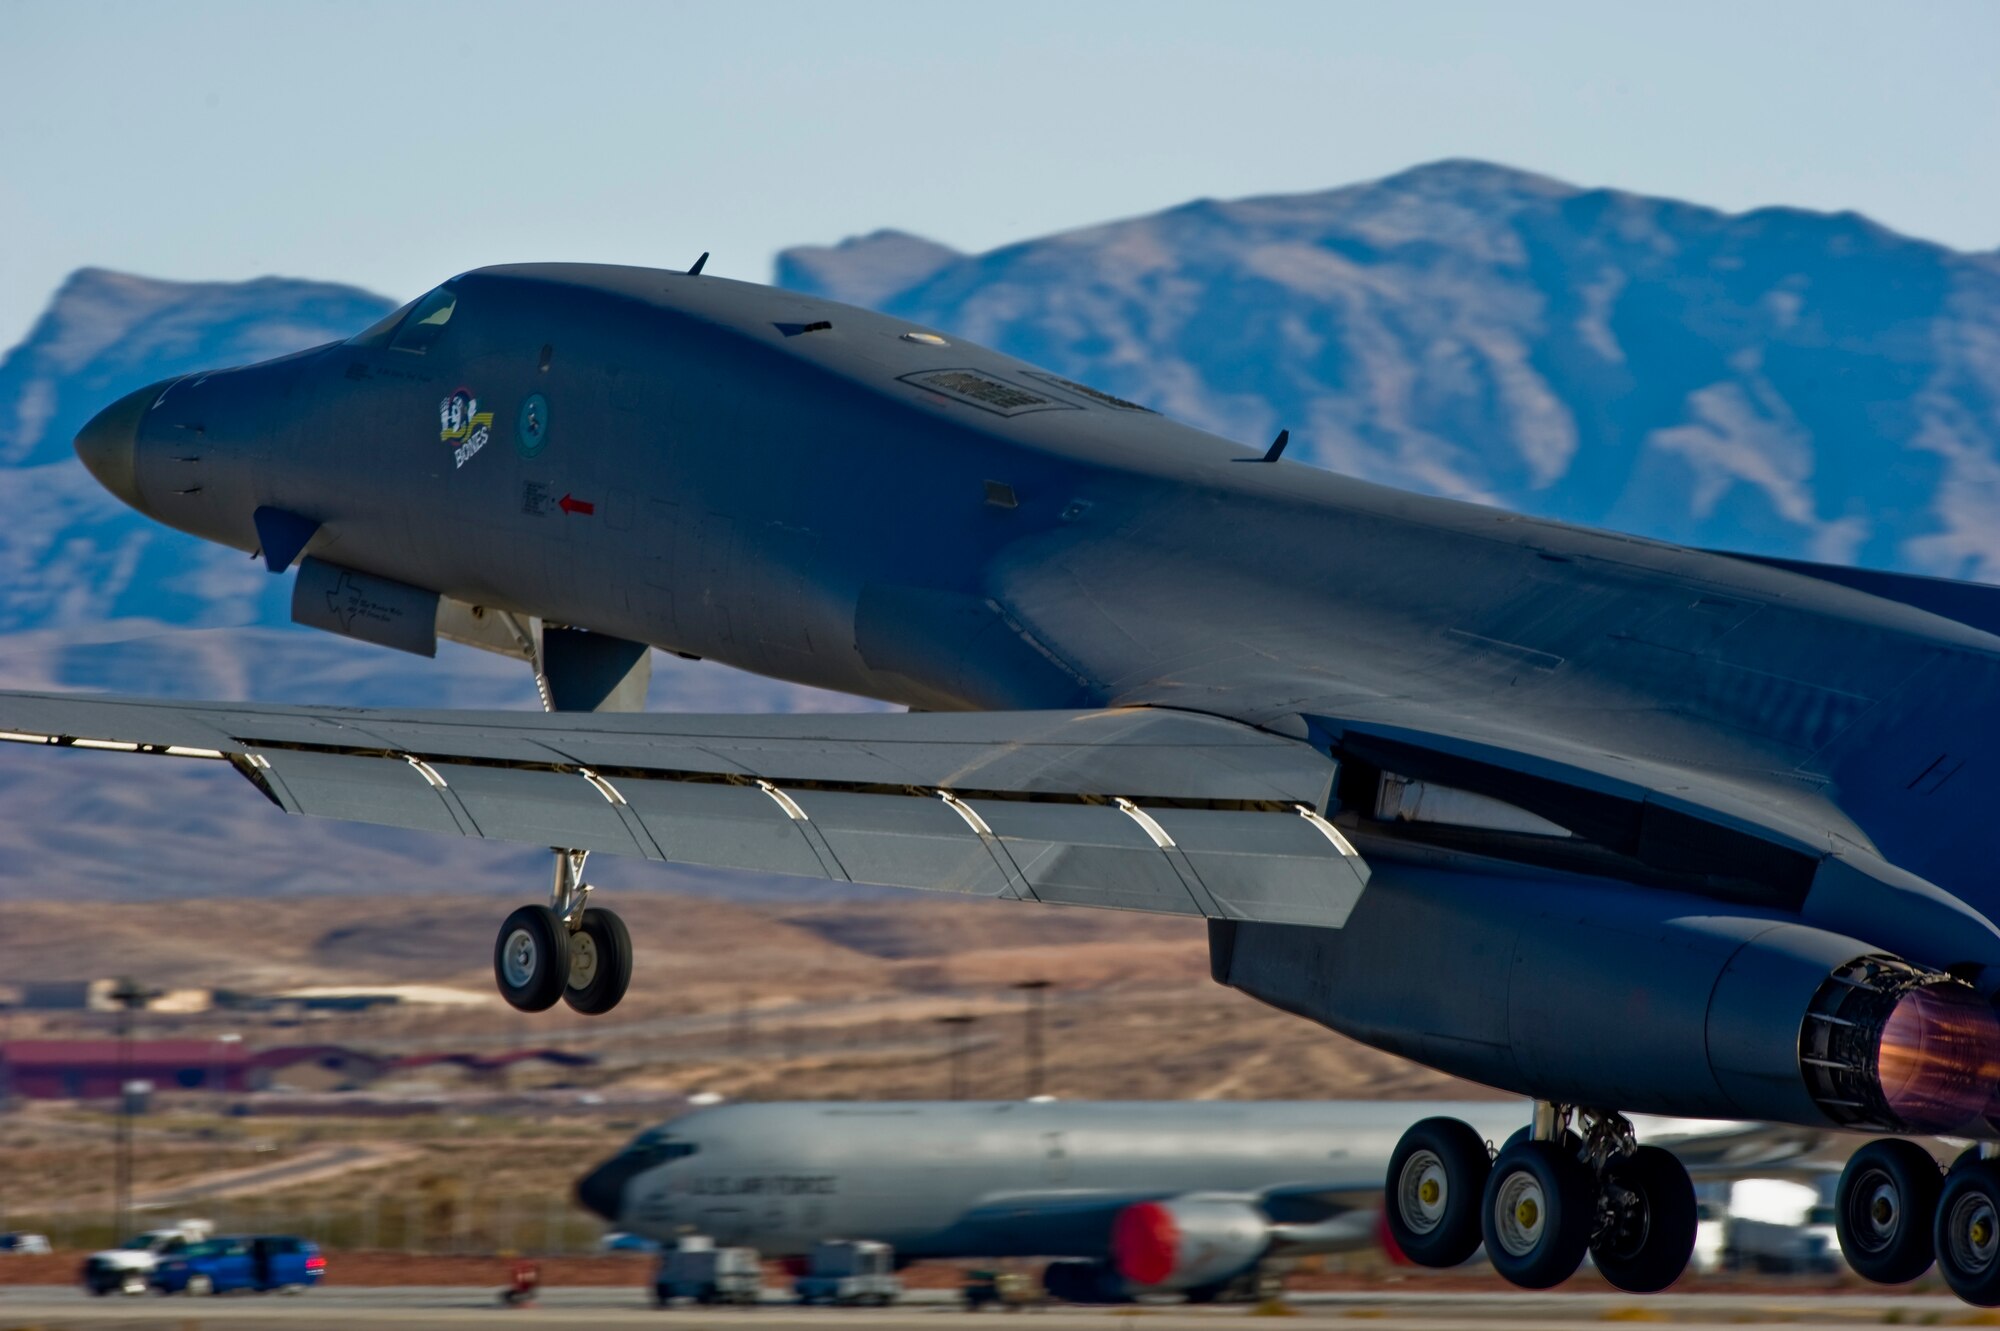 A U.S. Air Force B-1 Lancer, 77th Weapons Squadron, Dyess Air Force Base, Texas, takes off during the U.S. Air Force Weapons School mission employment exercise Dec. 5, 2011, at Nellis Air Force Base, Nev. The two-week-long mission employment phase is the final part of a five-and-a-half-month Weapons School graduate course that showcases the students newly acquired skills to test their ability to plan, execute and lead complex missions. (U.S. Air Force photo by Airman 1st Class Matthew Lancaster/Released)